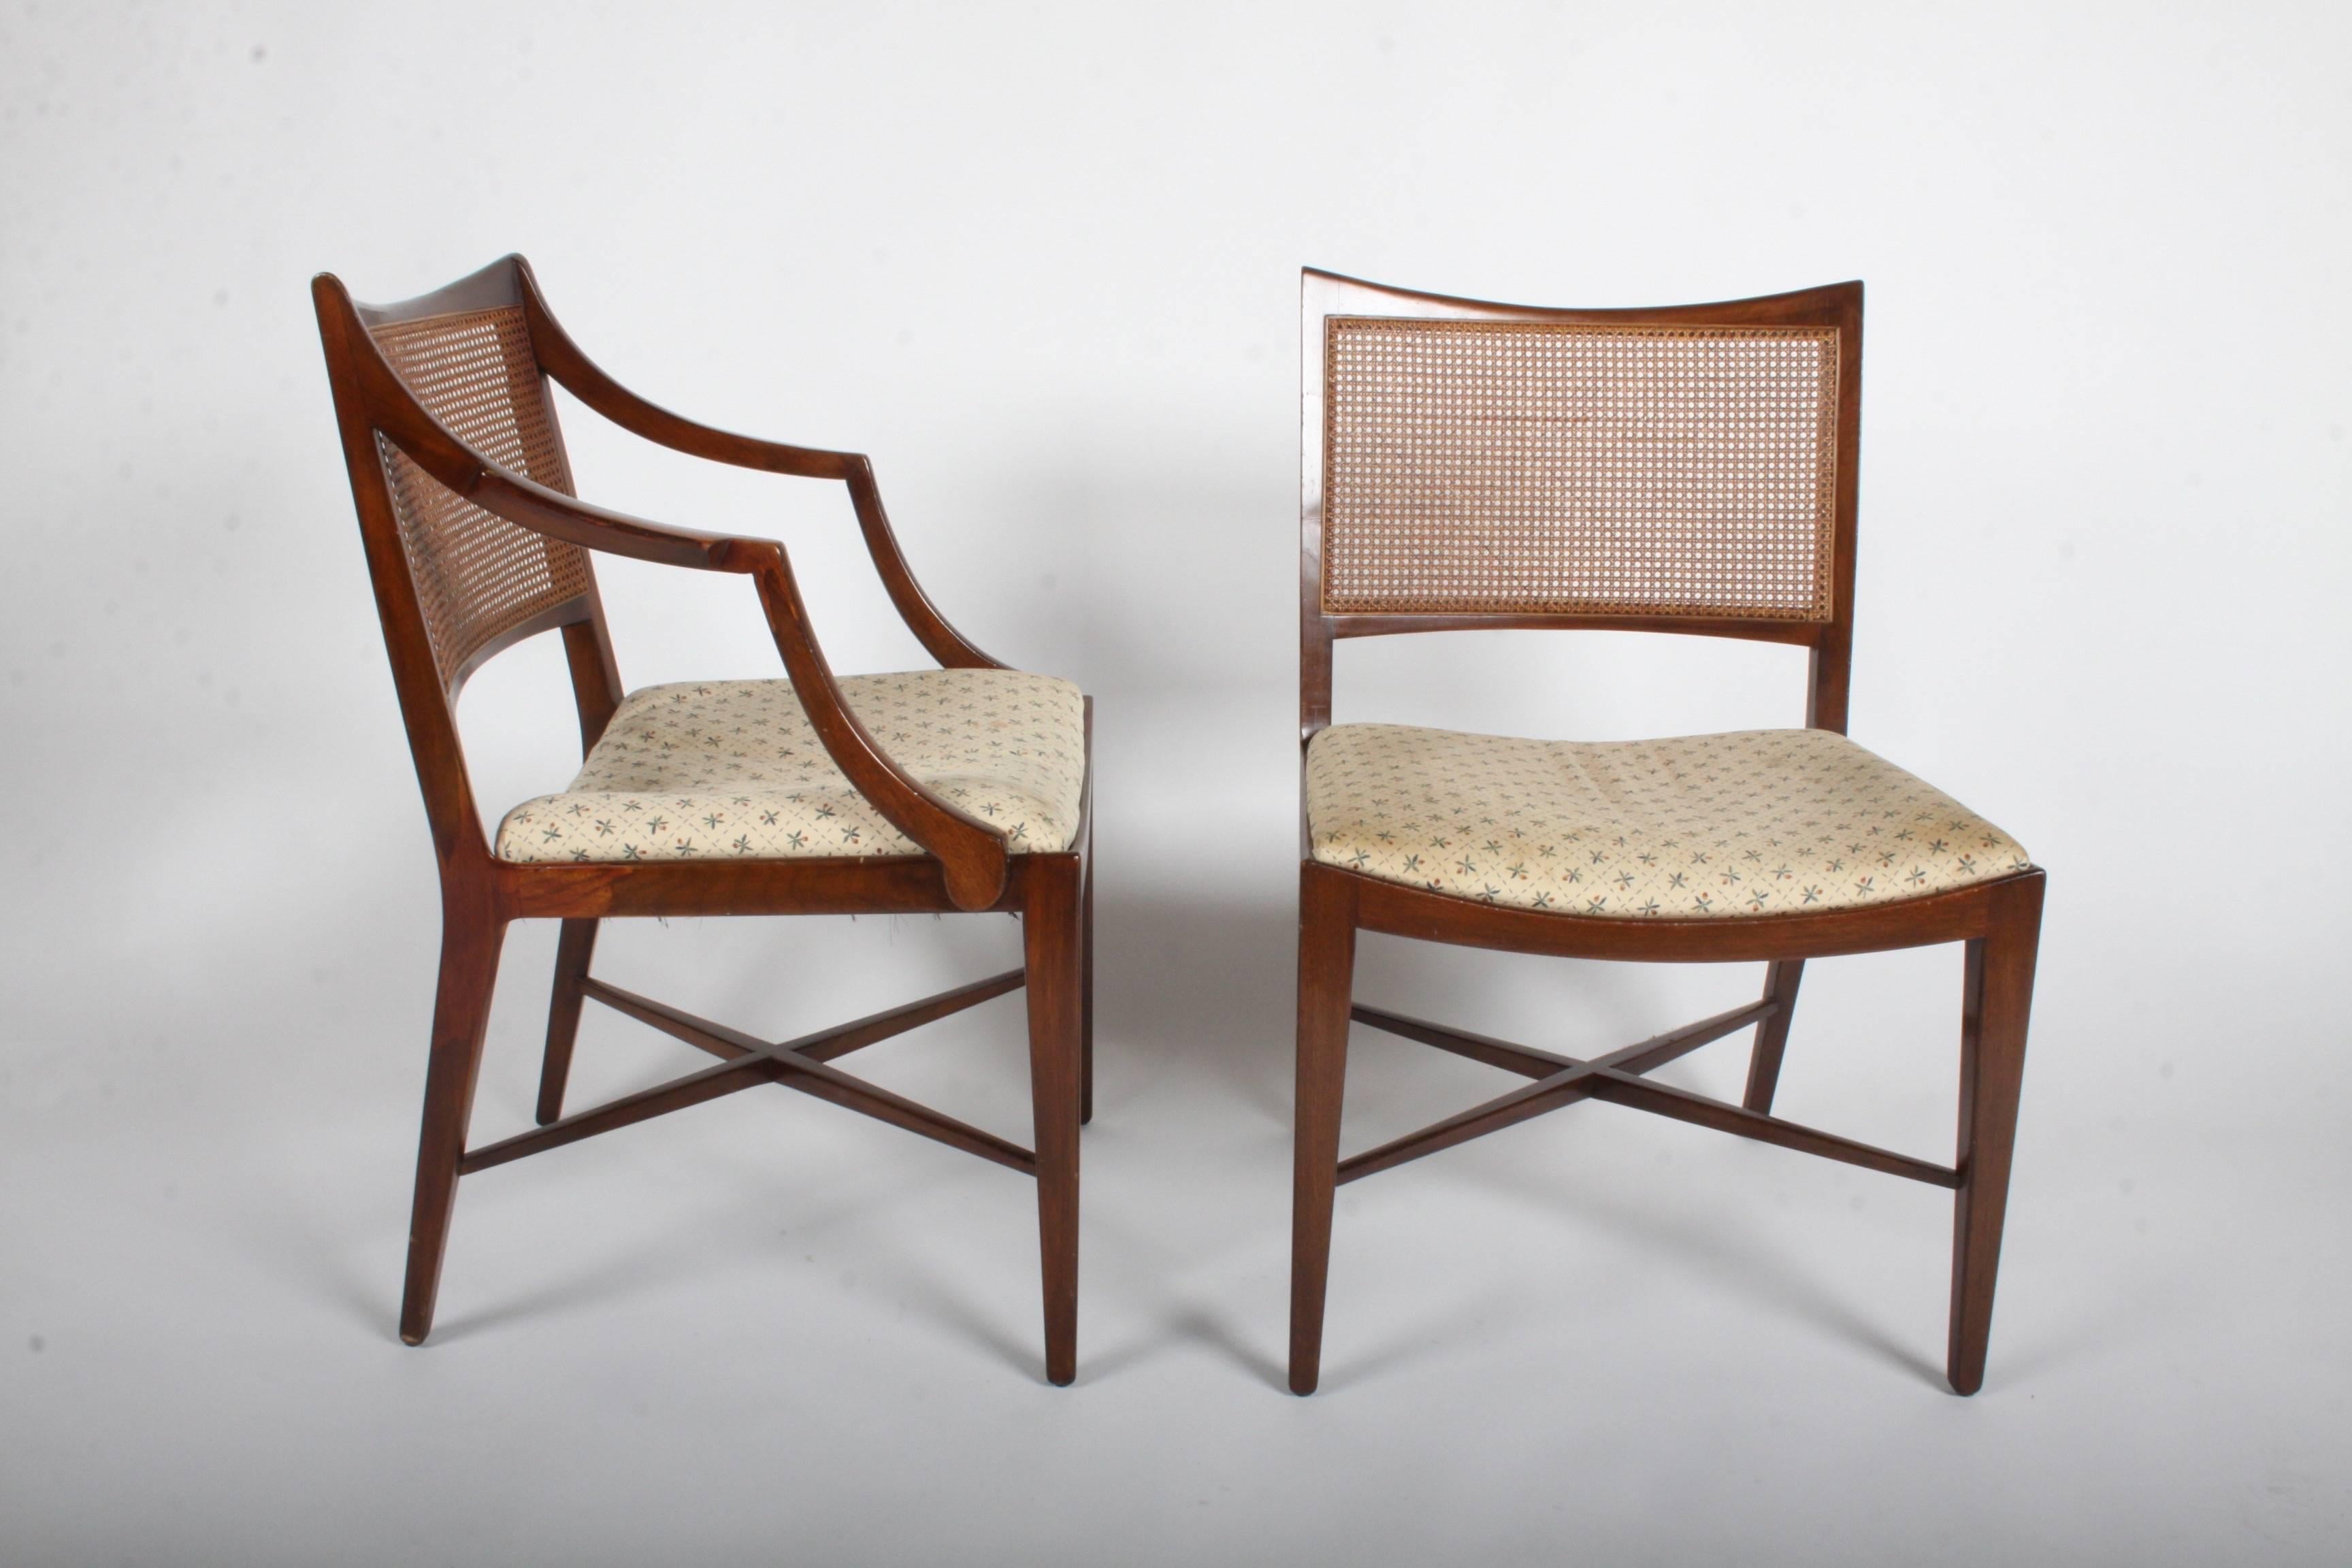 Elegant set of four Edward Wormley for Dunbar walnut frame and caned back dining chairs, two arms and two sides chairs. Curved back with caned panel and X-stretcher on legs. Includes frames to be refinished prior to shipping, seats are need of